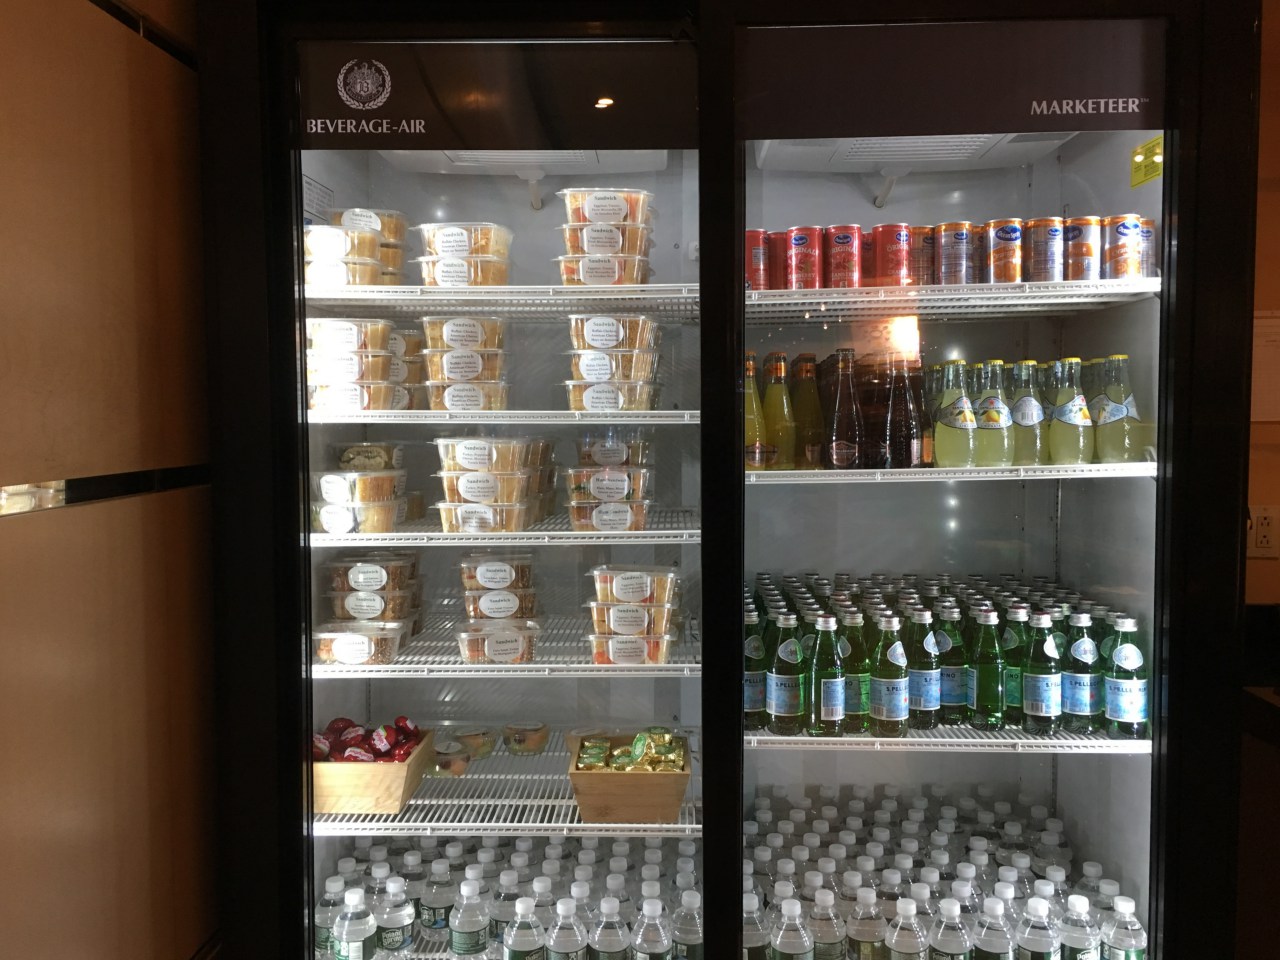 Alitalia JFK Lounge Review: Sandwiches in Chilled Case